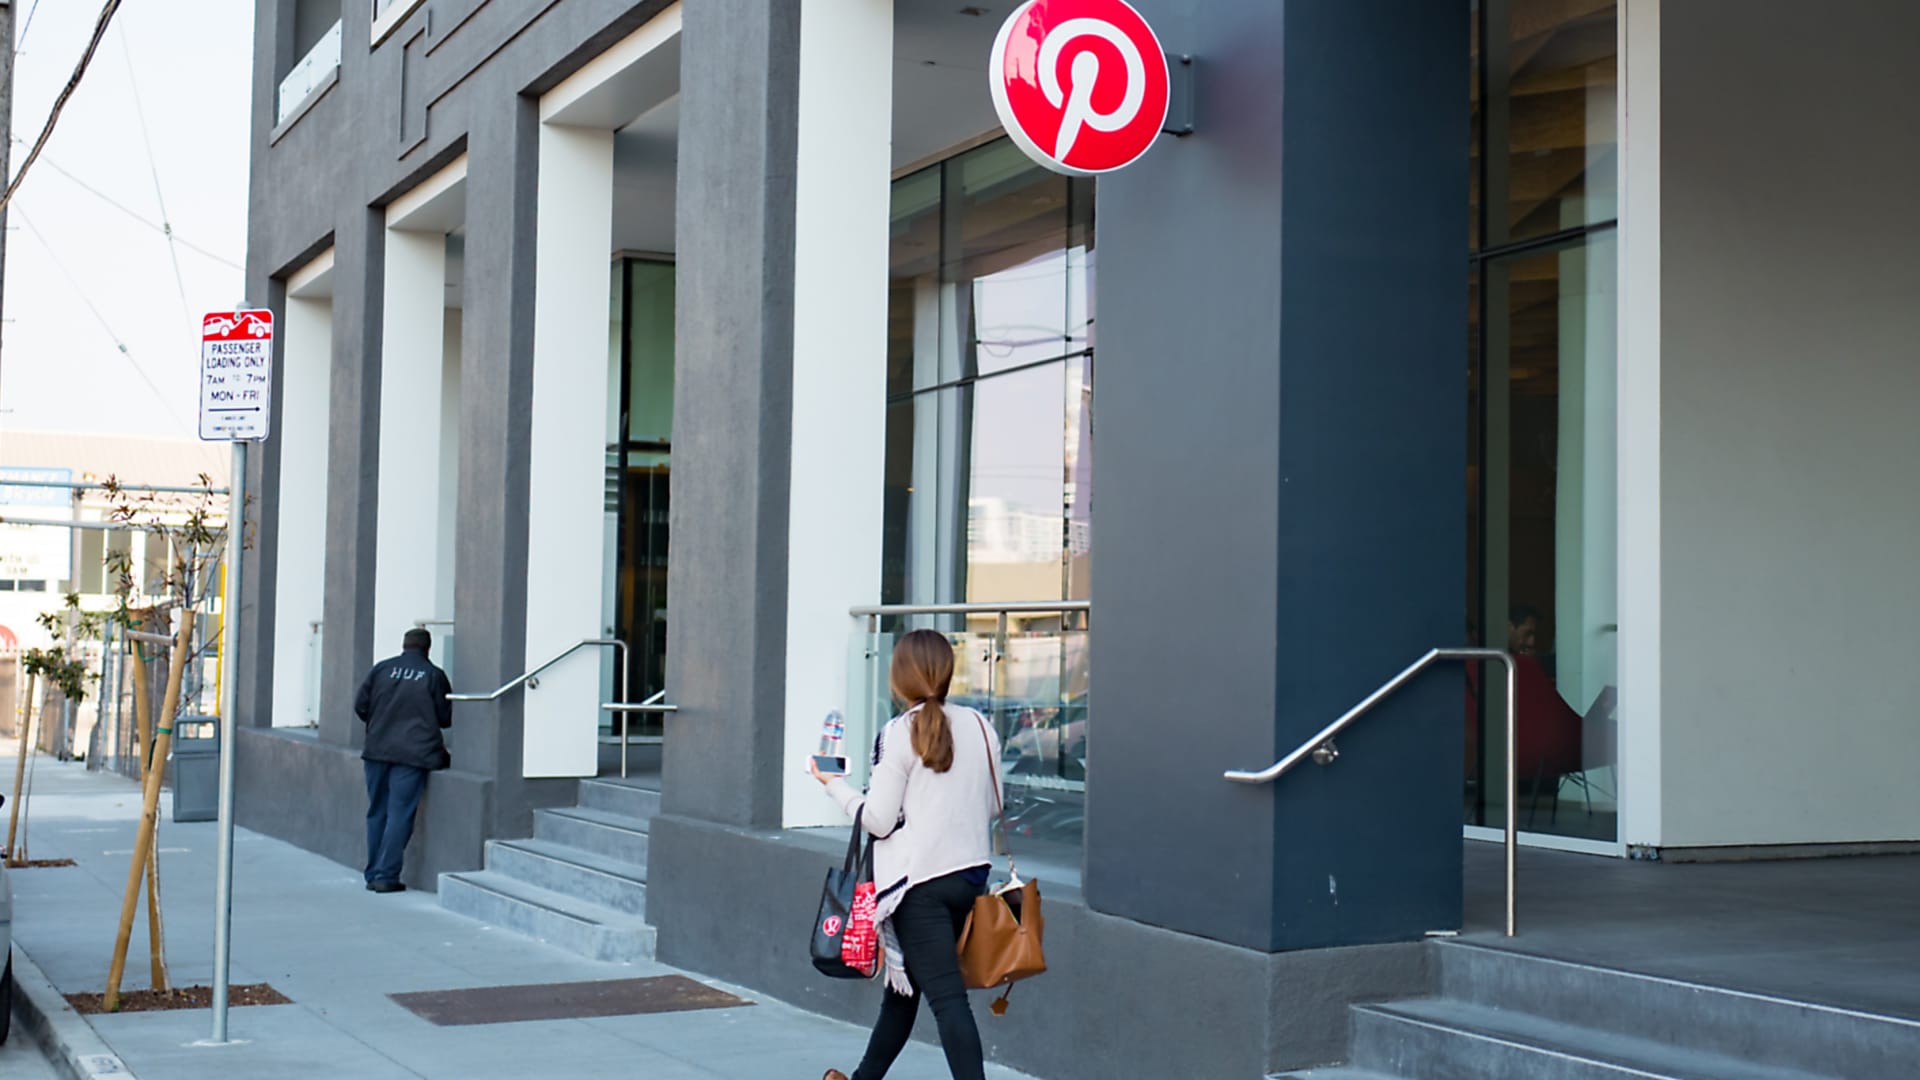 Pinterest climbs on user numbers and Elliott investment even as financials disappoint